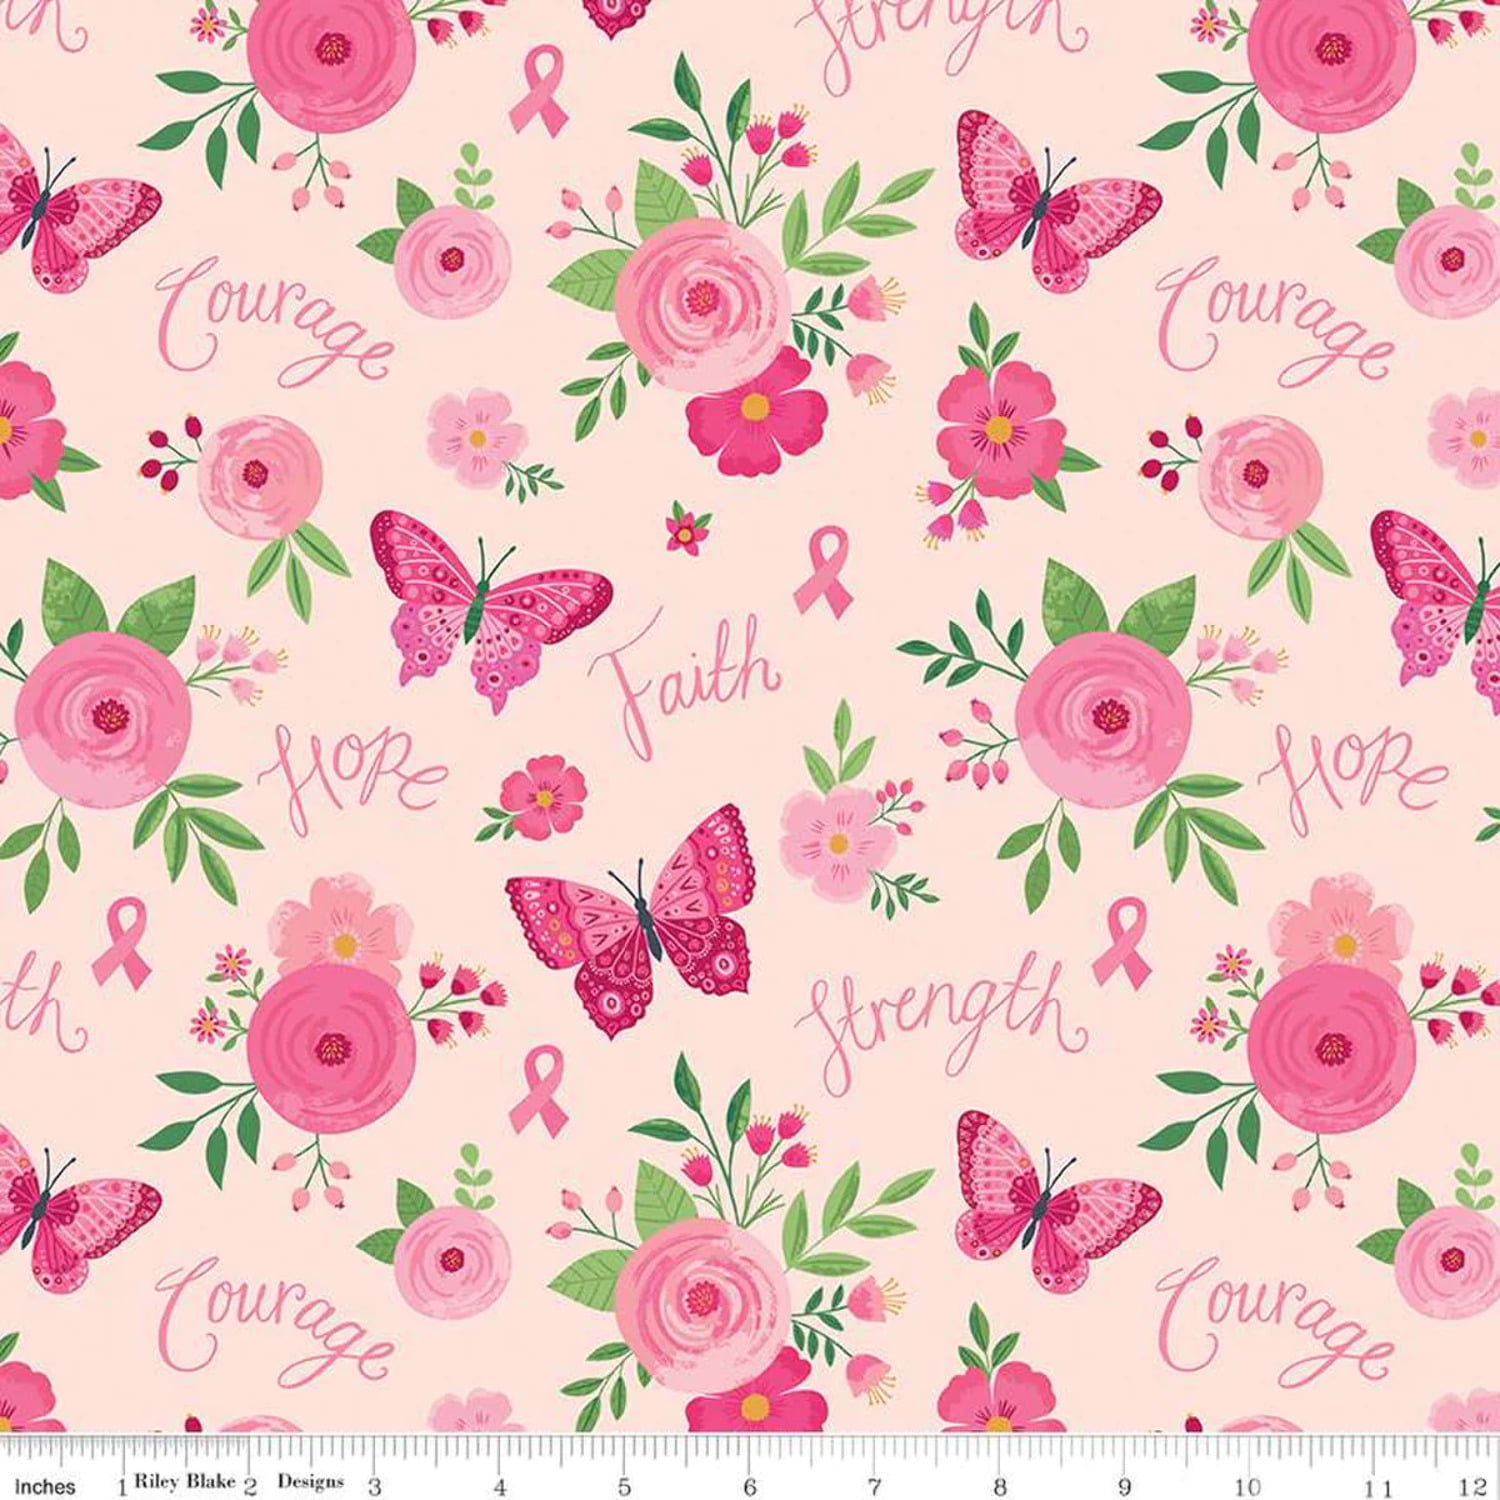 FREE SHIPPING!!! Blush Cotton Modal Fabric, DIY Projects by the